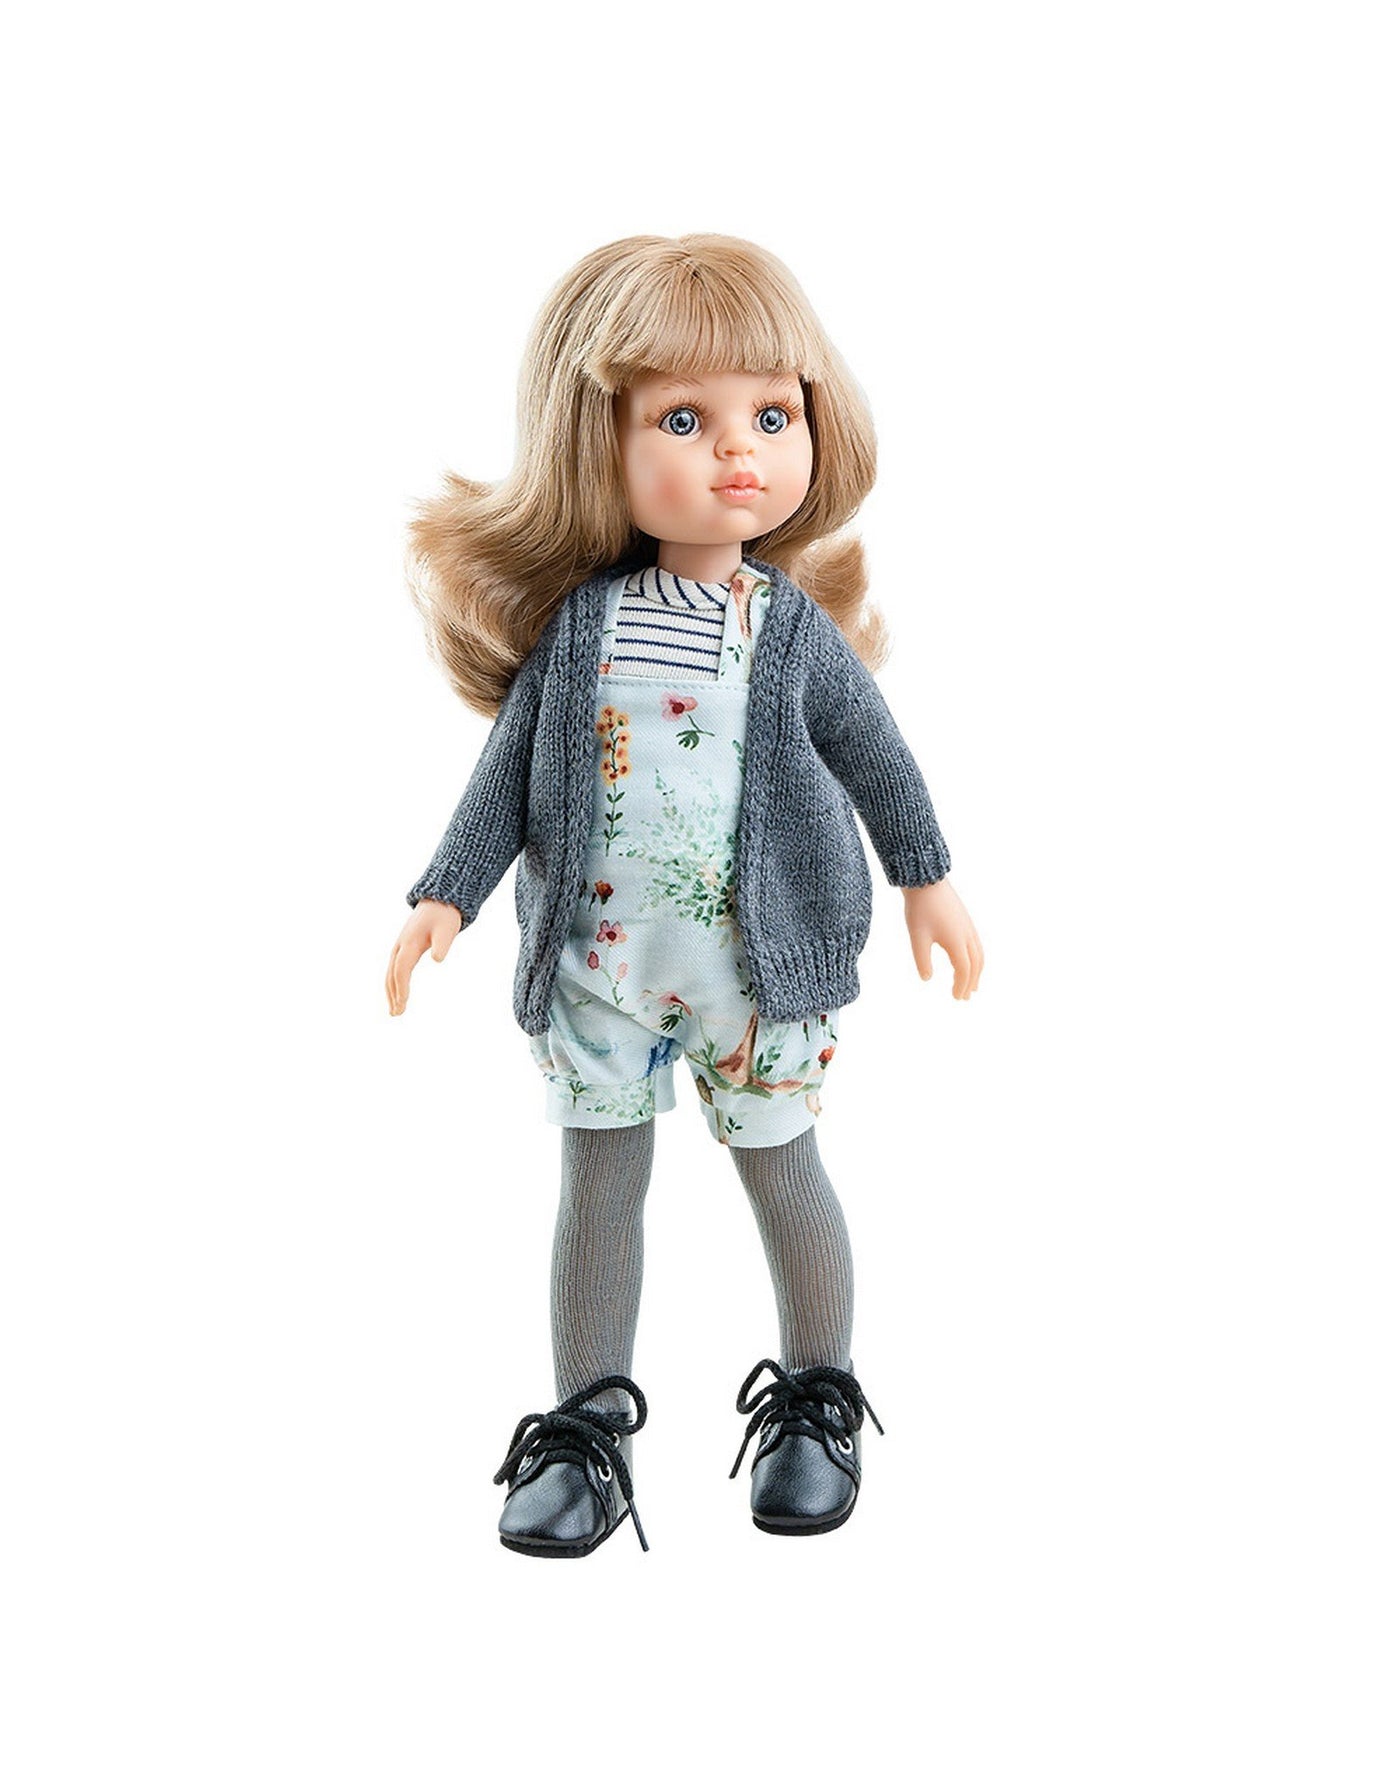 Las Amigas Doll - Carla with blue jumper and gray jacket - Paola Reina